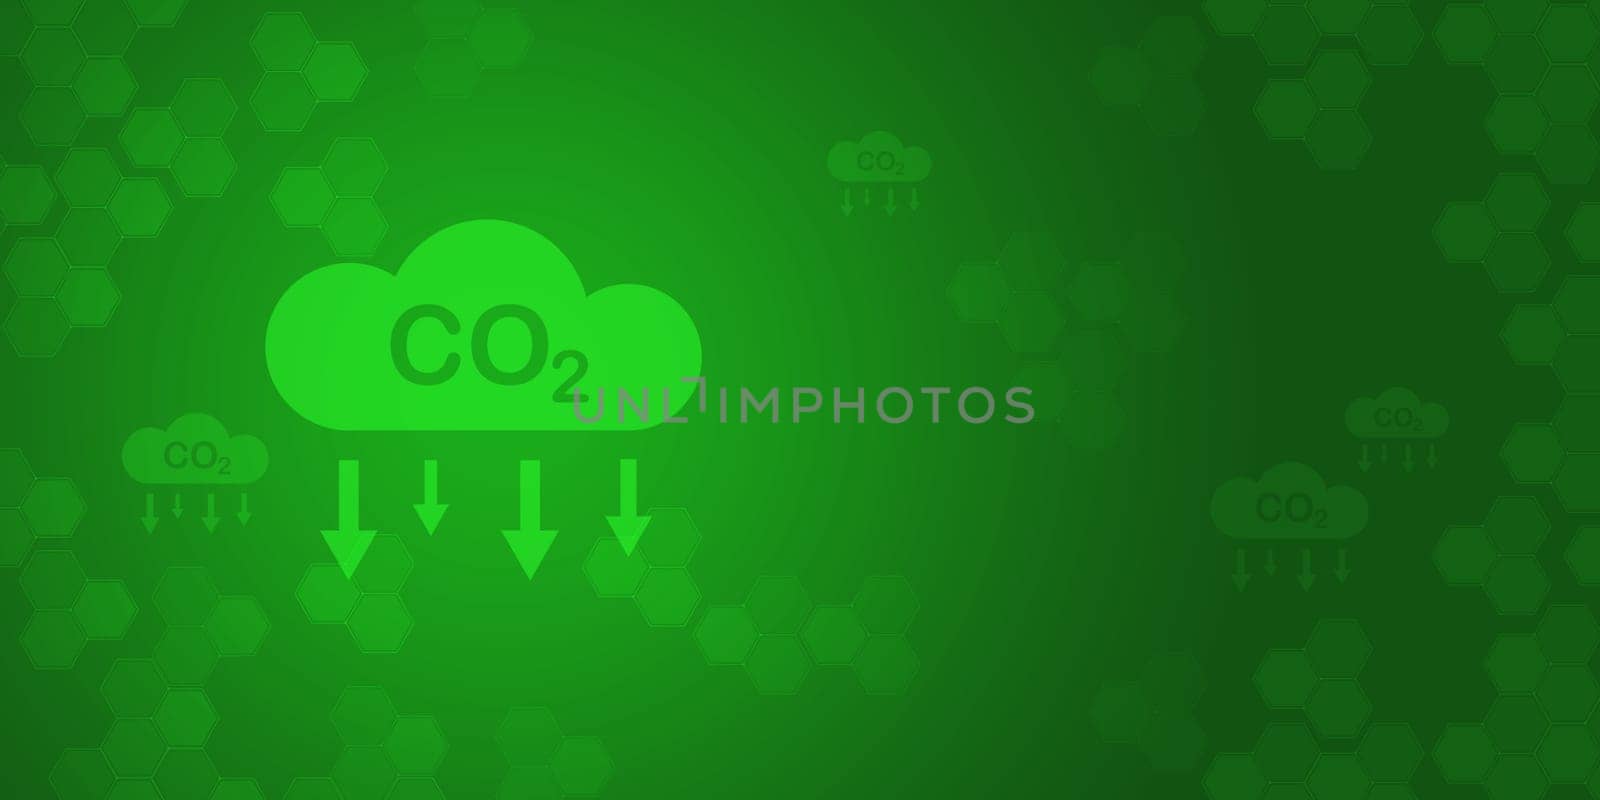 Reduce CO2 emissions to limit climate change and global warming, Low greenhouse gas levels, decarbonize, net zero carbon dioxide footprint, abstract green background. by Unimages2527